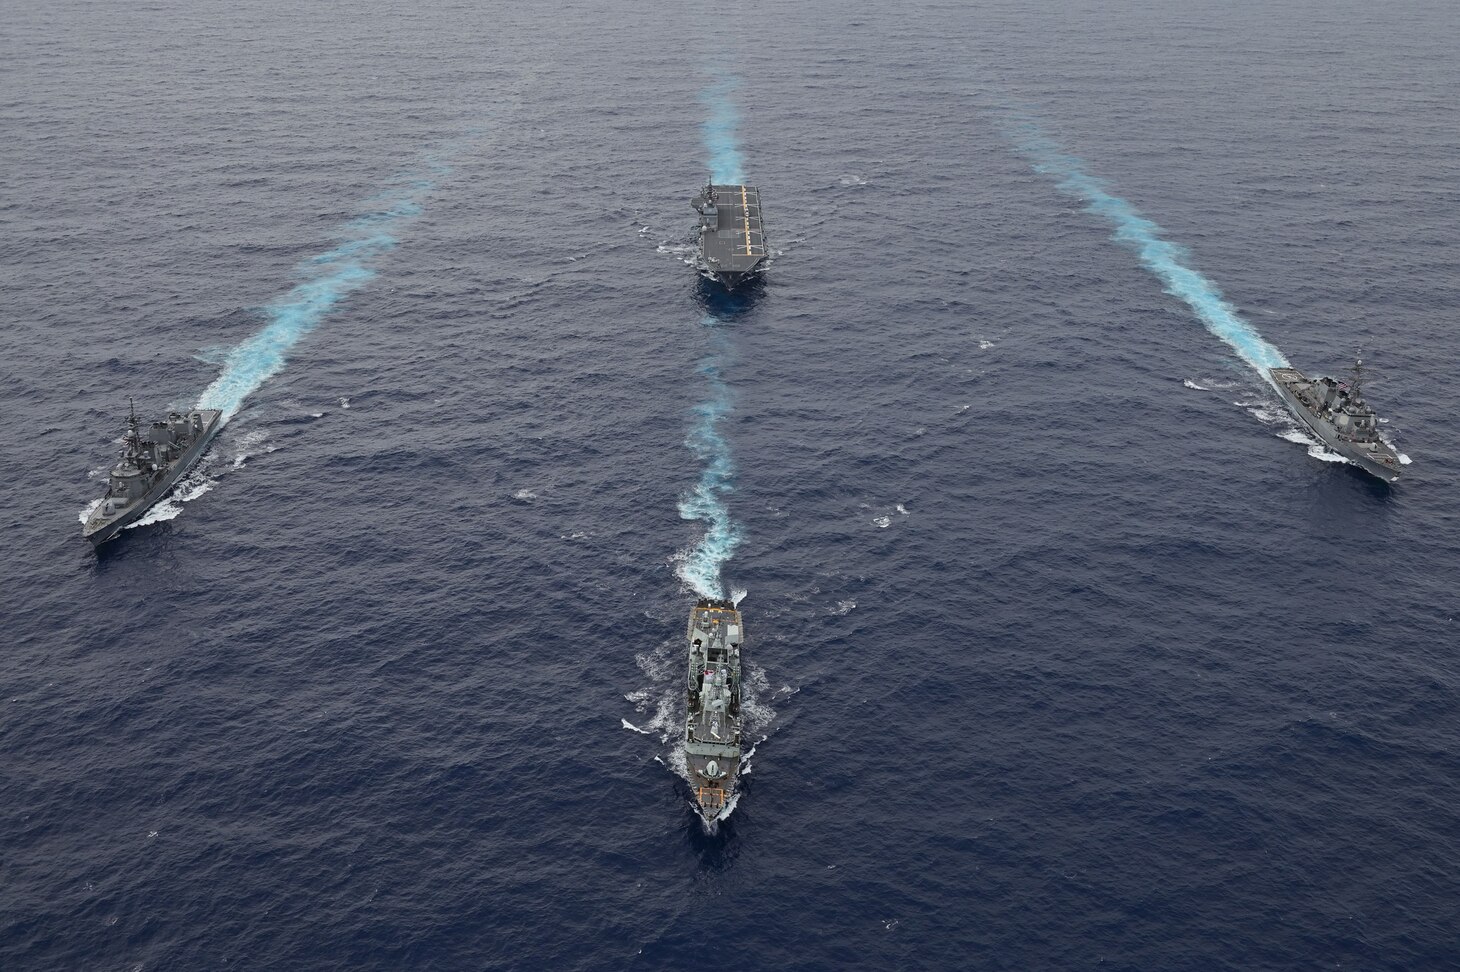 Arleigh Burke-class guided-missile destroyer USS Higgins (DDG 76), cruises in formation with Izumo-class multi-purpose destroyer JS Izumo (DDH 183) and a Japanese submarine while conducting routine operations in the South China Sea, Oct. 1. Higgins is participating in multi-lateral exercises in the South China Sea in support of the Japan Maritime Self-Defense Force’s Indo-Pacific deployment, along with the Royal Canadian Navy. Routine multi-lateral exercises like this strengthen interoperability and our mutual commitment to maintaining a free and open Indo-Pacific.